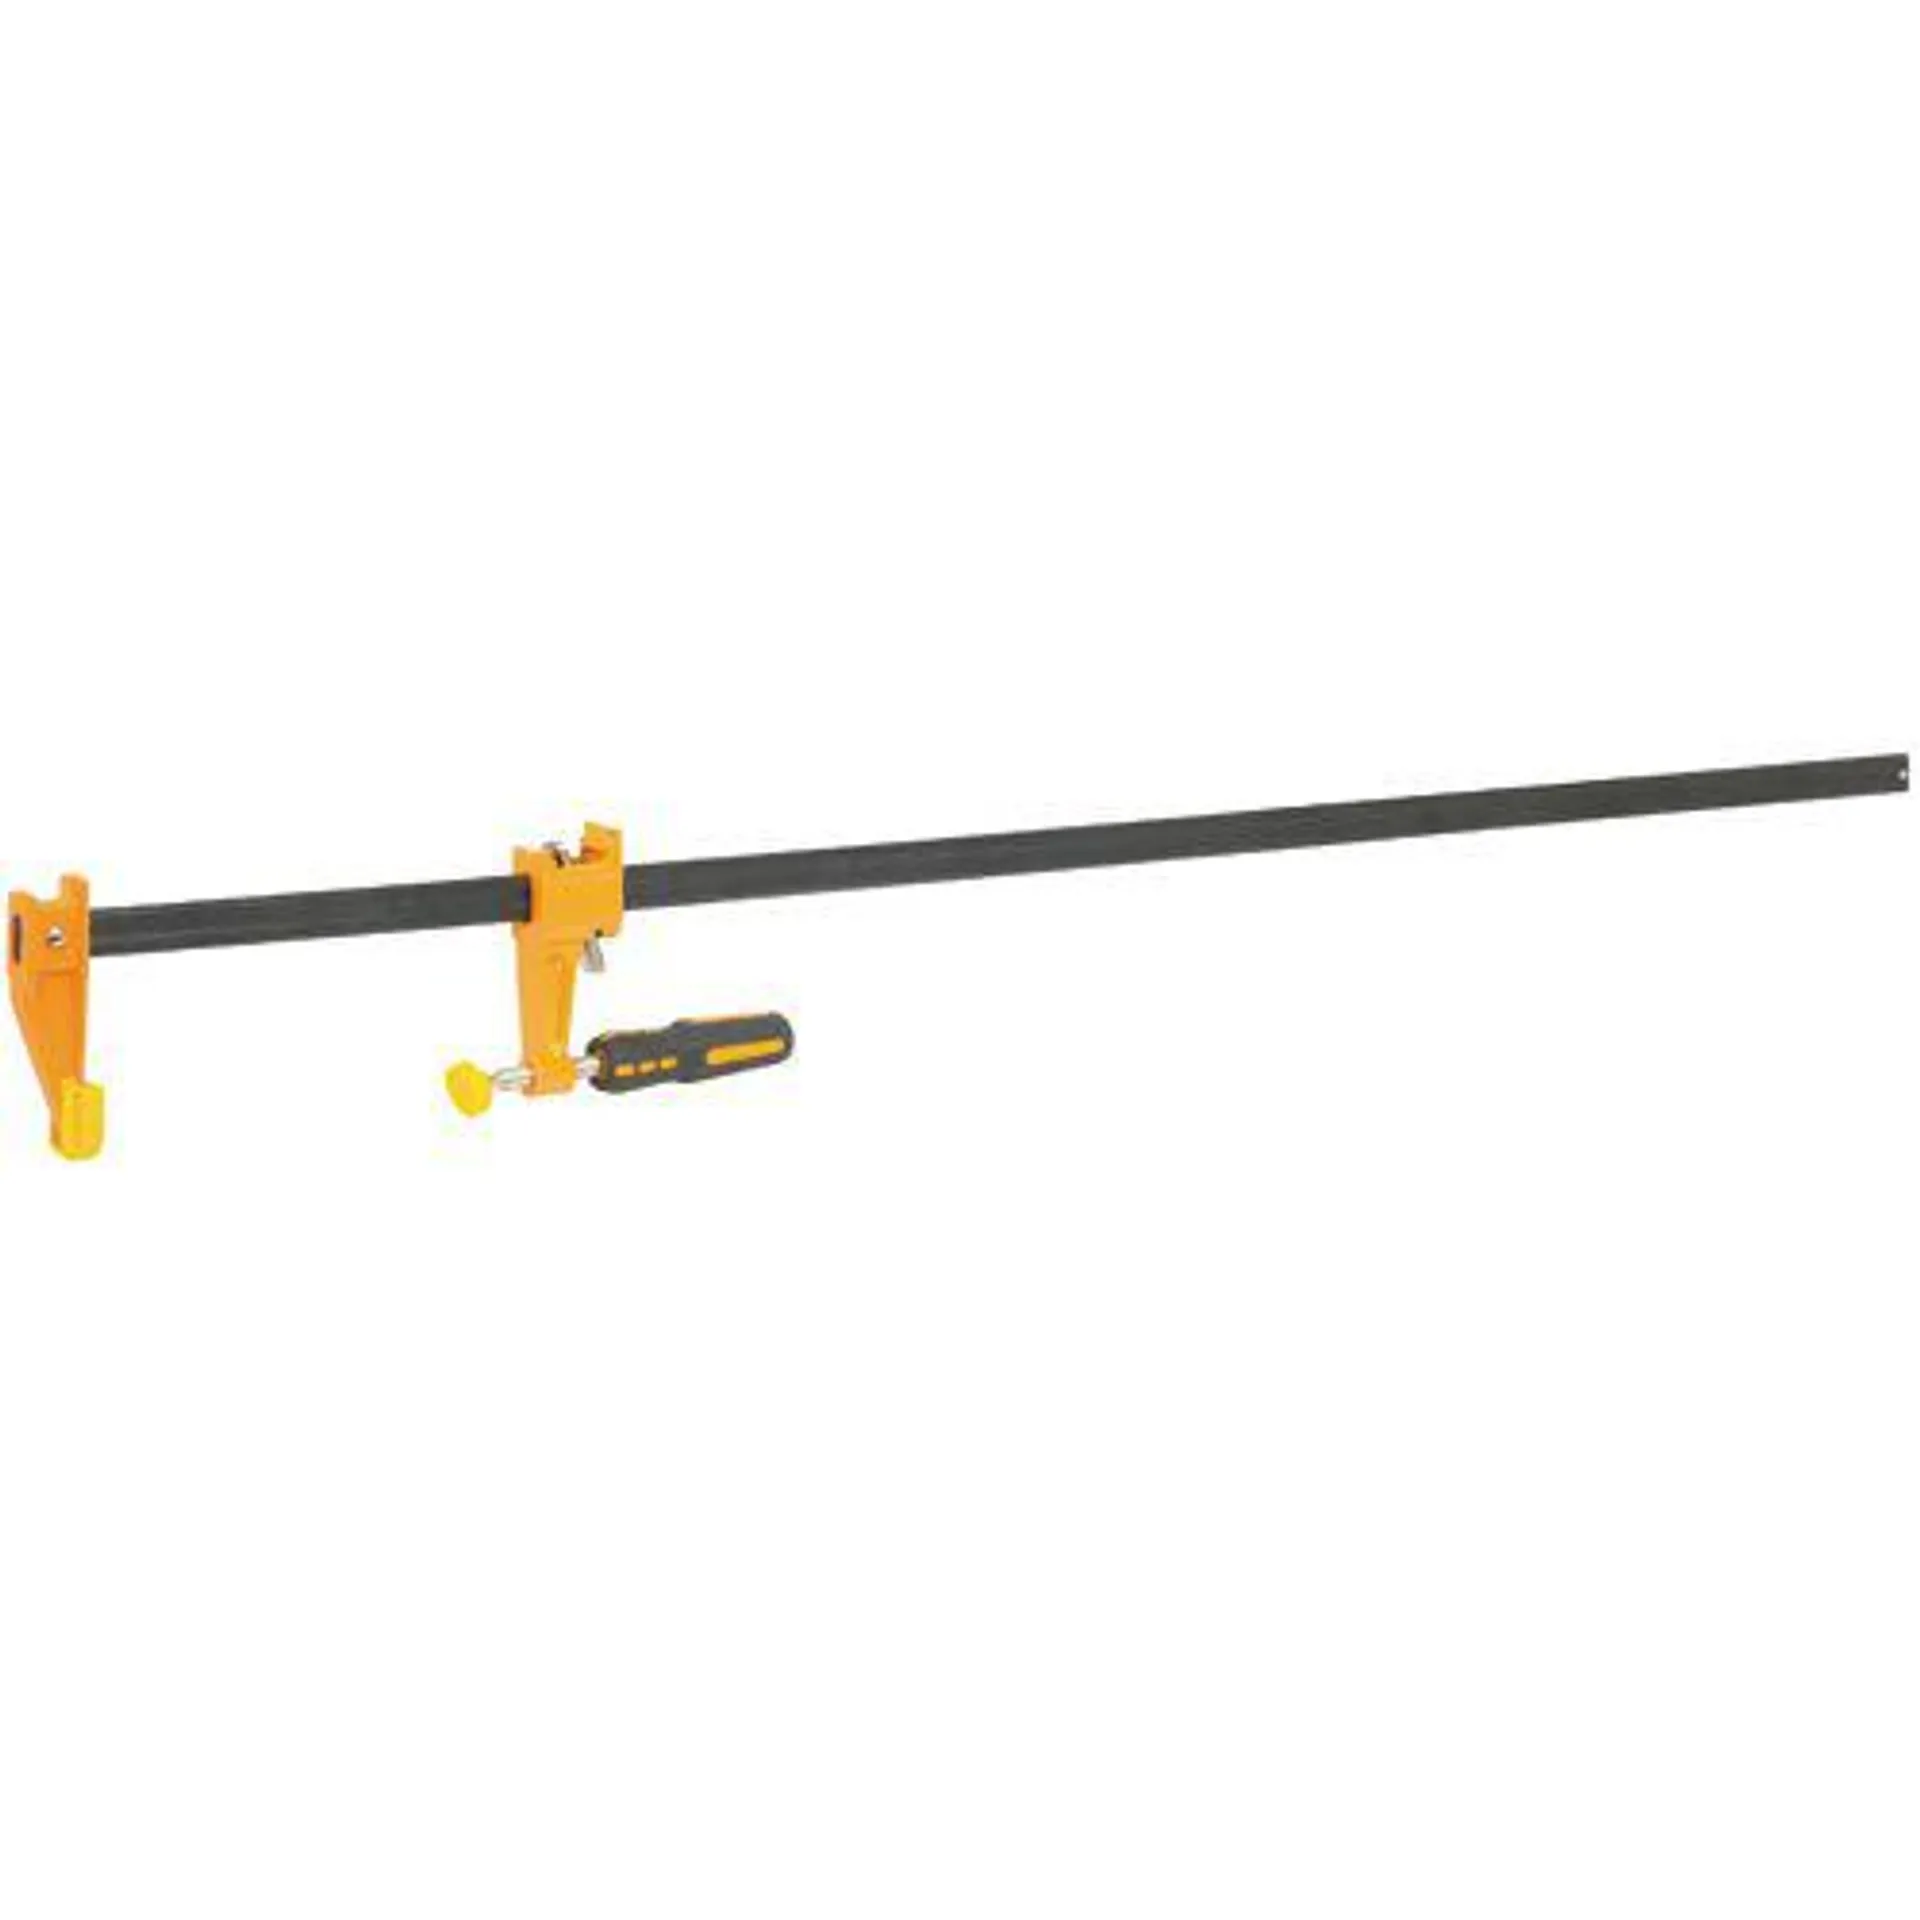 36 in. Quick Release Bar Clamp